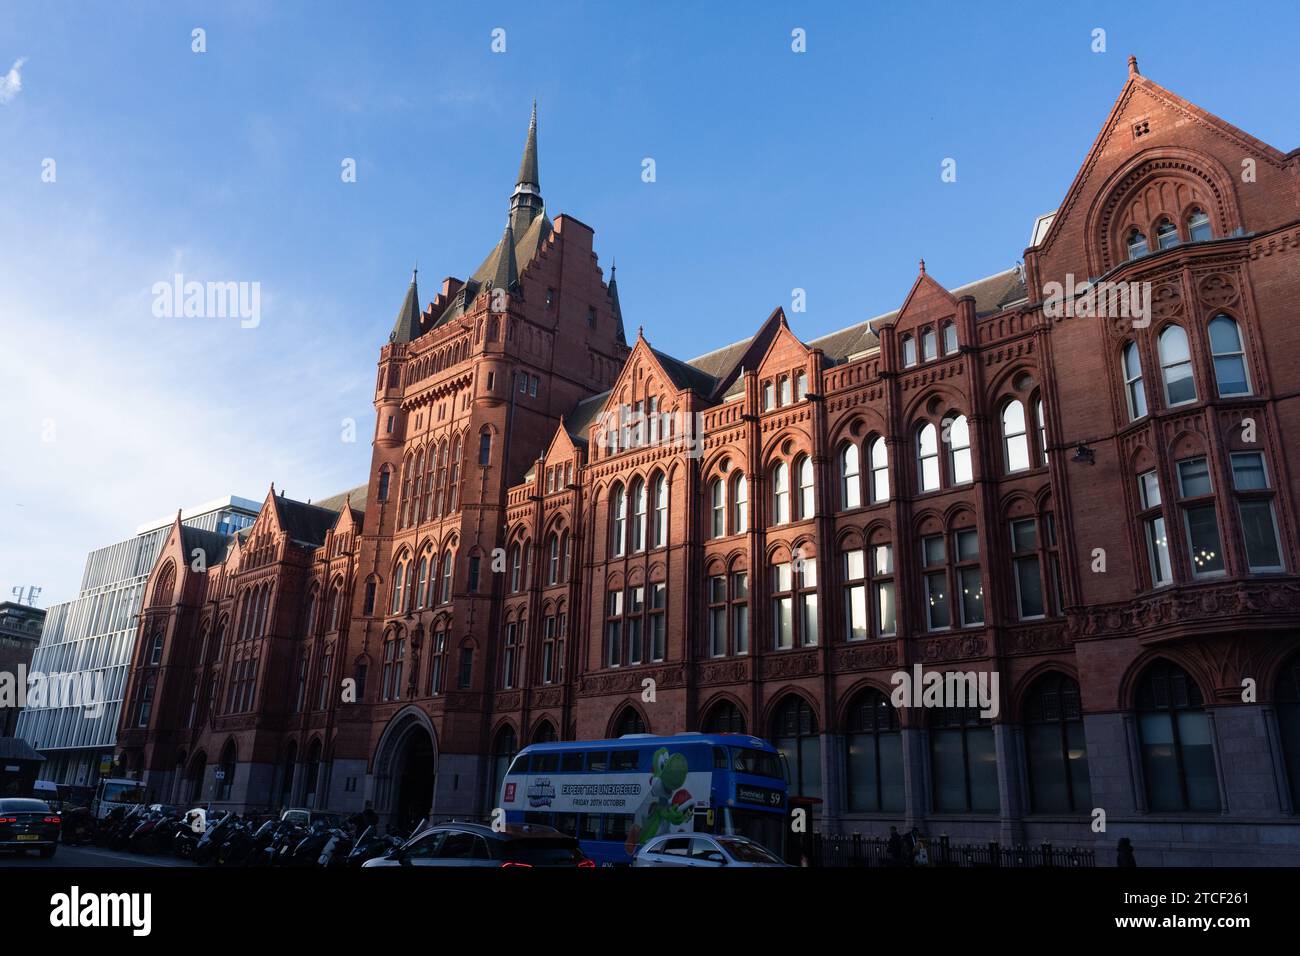 Holborn Bars, Prudential Assurance Building is a large red terracotta Victorian building on Holborn in Camden, London Stock Photo